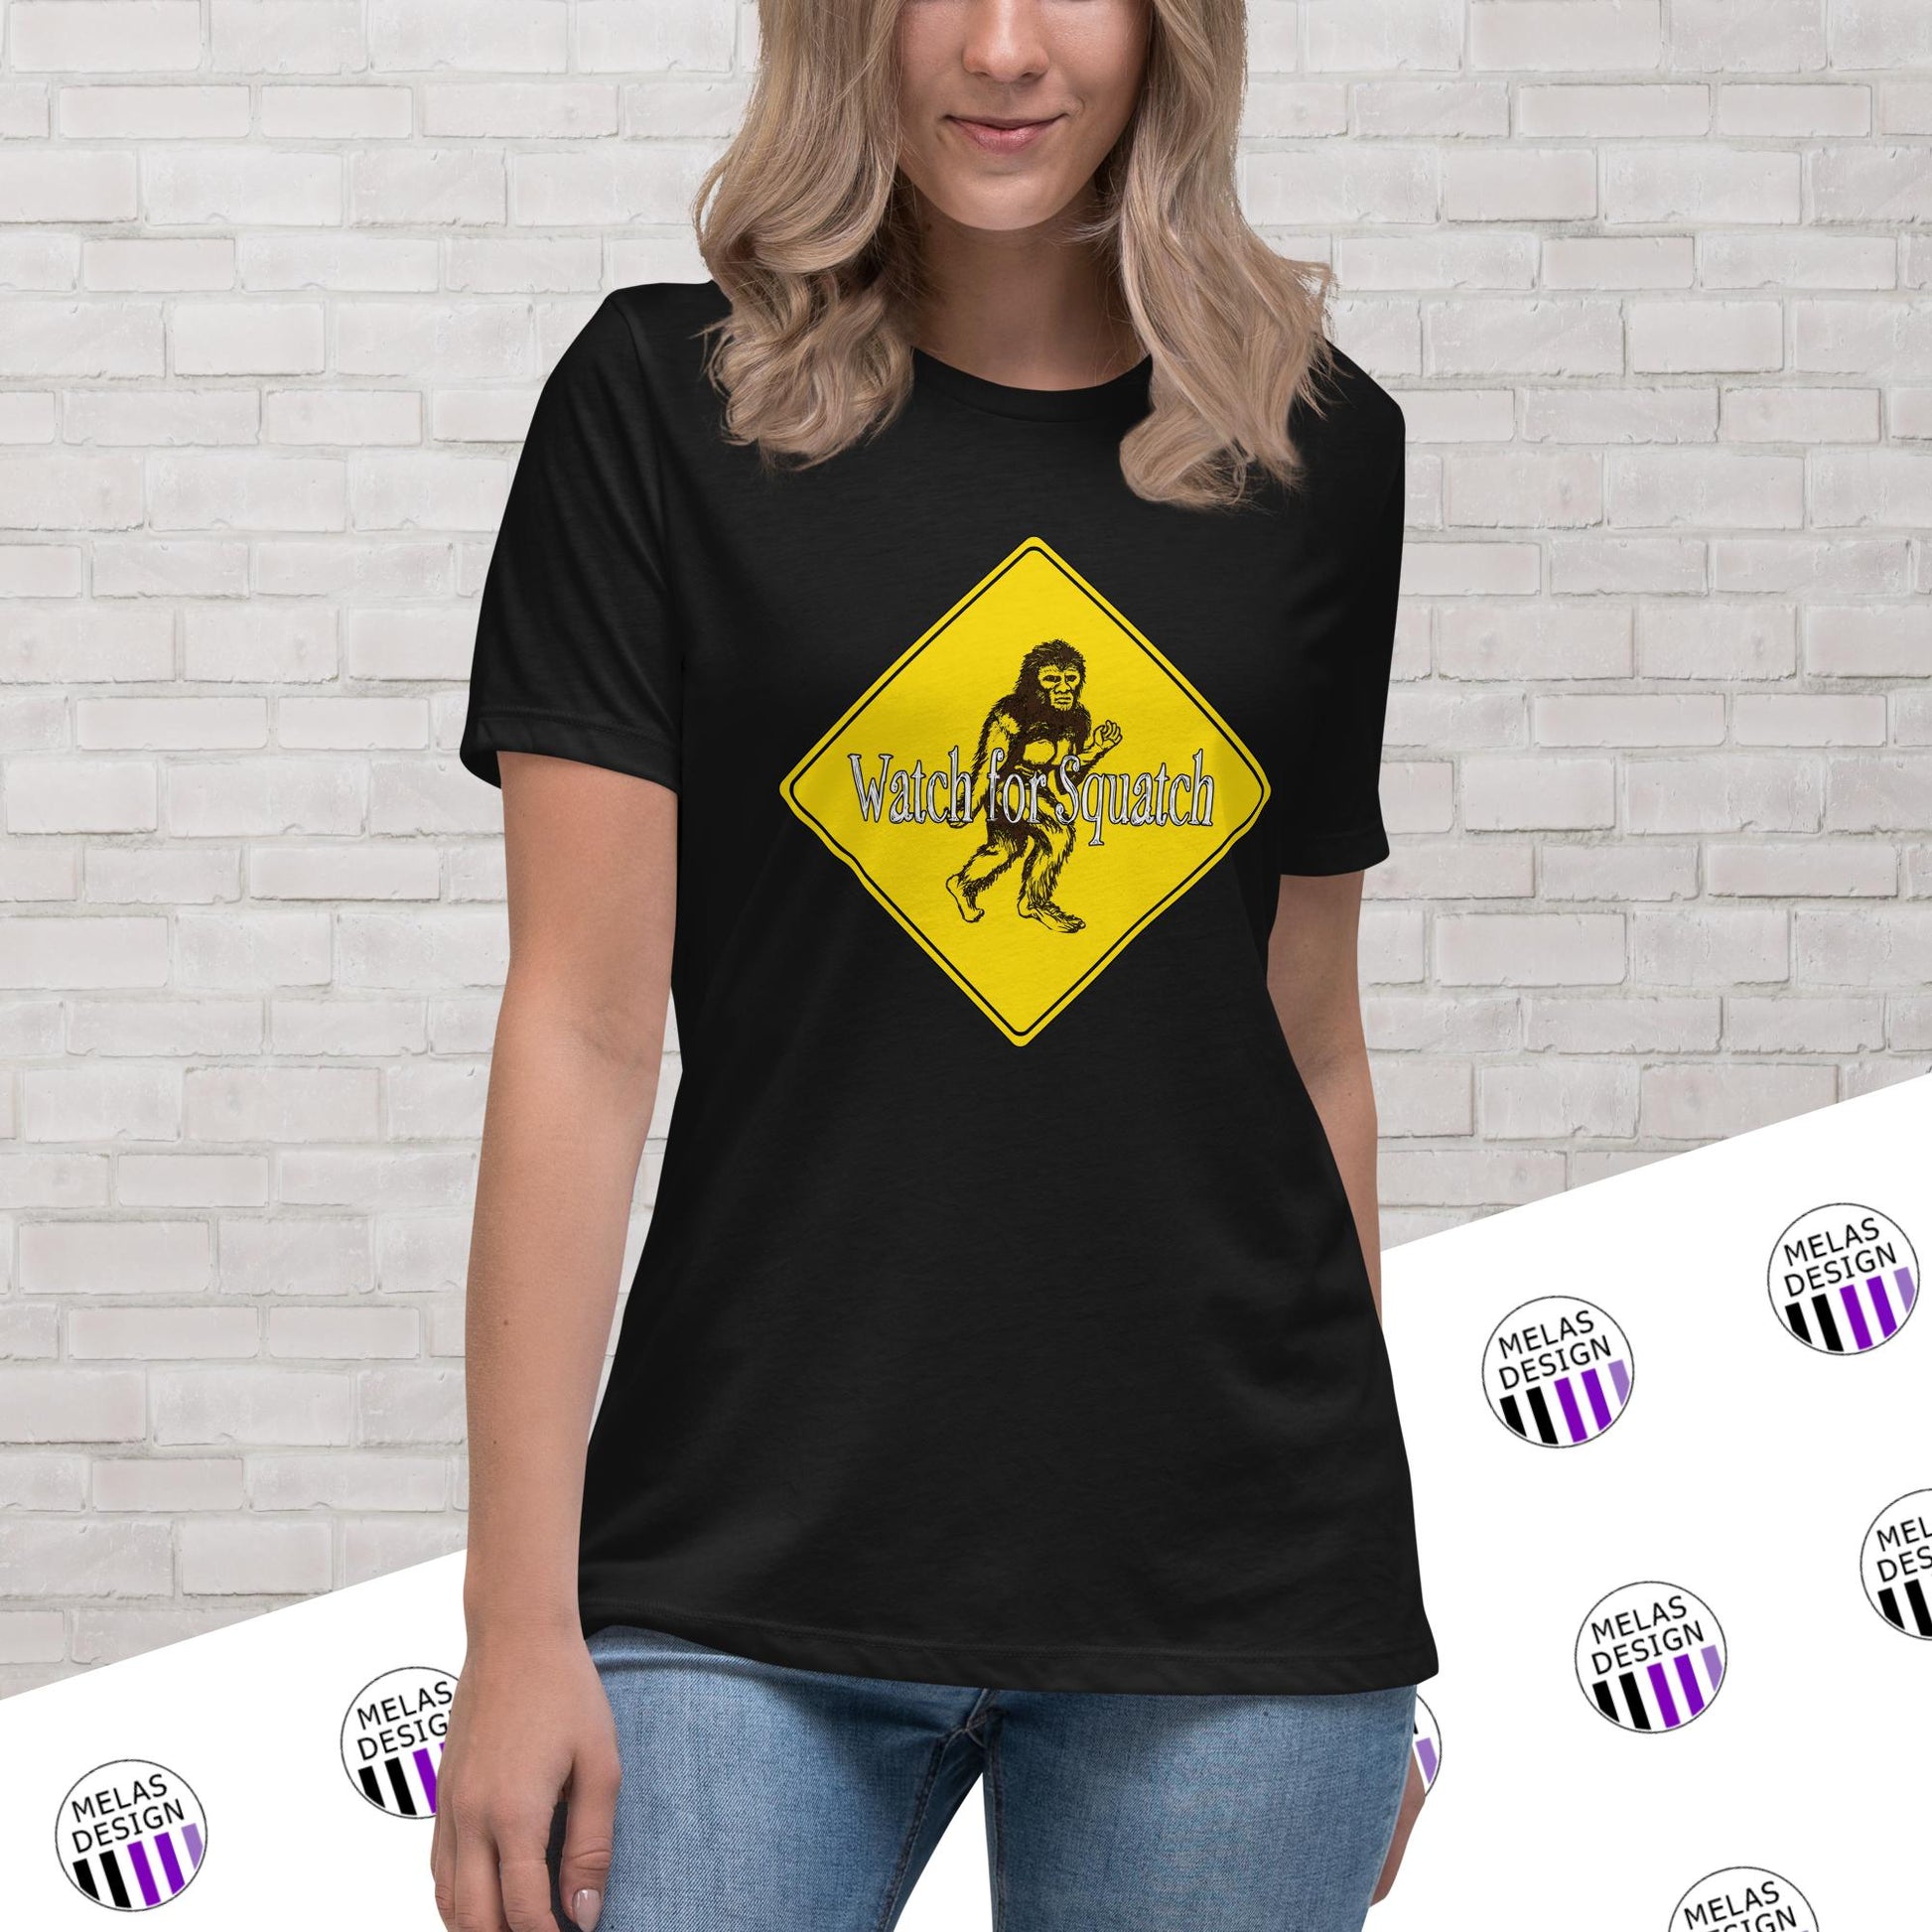 watch for squatch womens relaxed t-shirt; Melasdesign; cryptid clothing collection; Bigfoot; Sasquatch; Yeti; t-shirt; fashion; cryptids; 